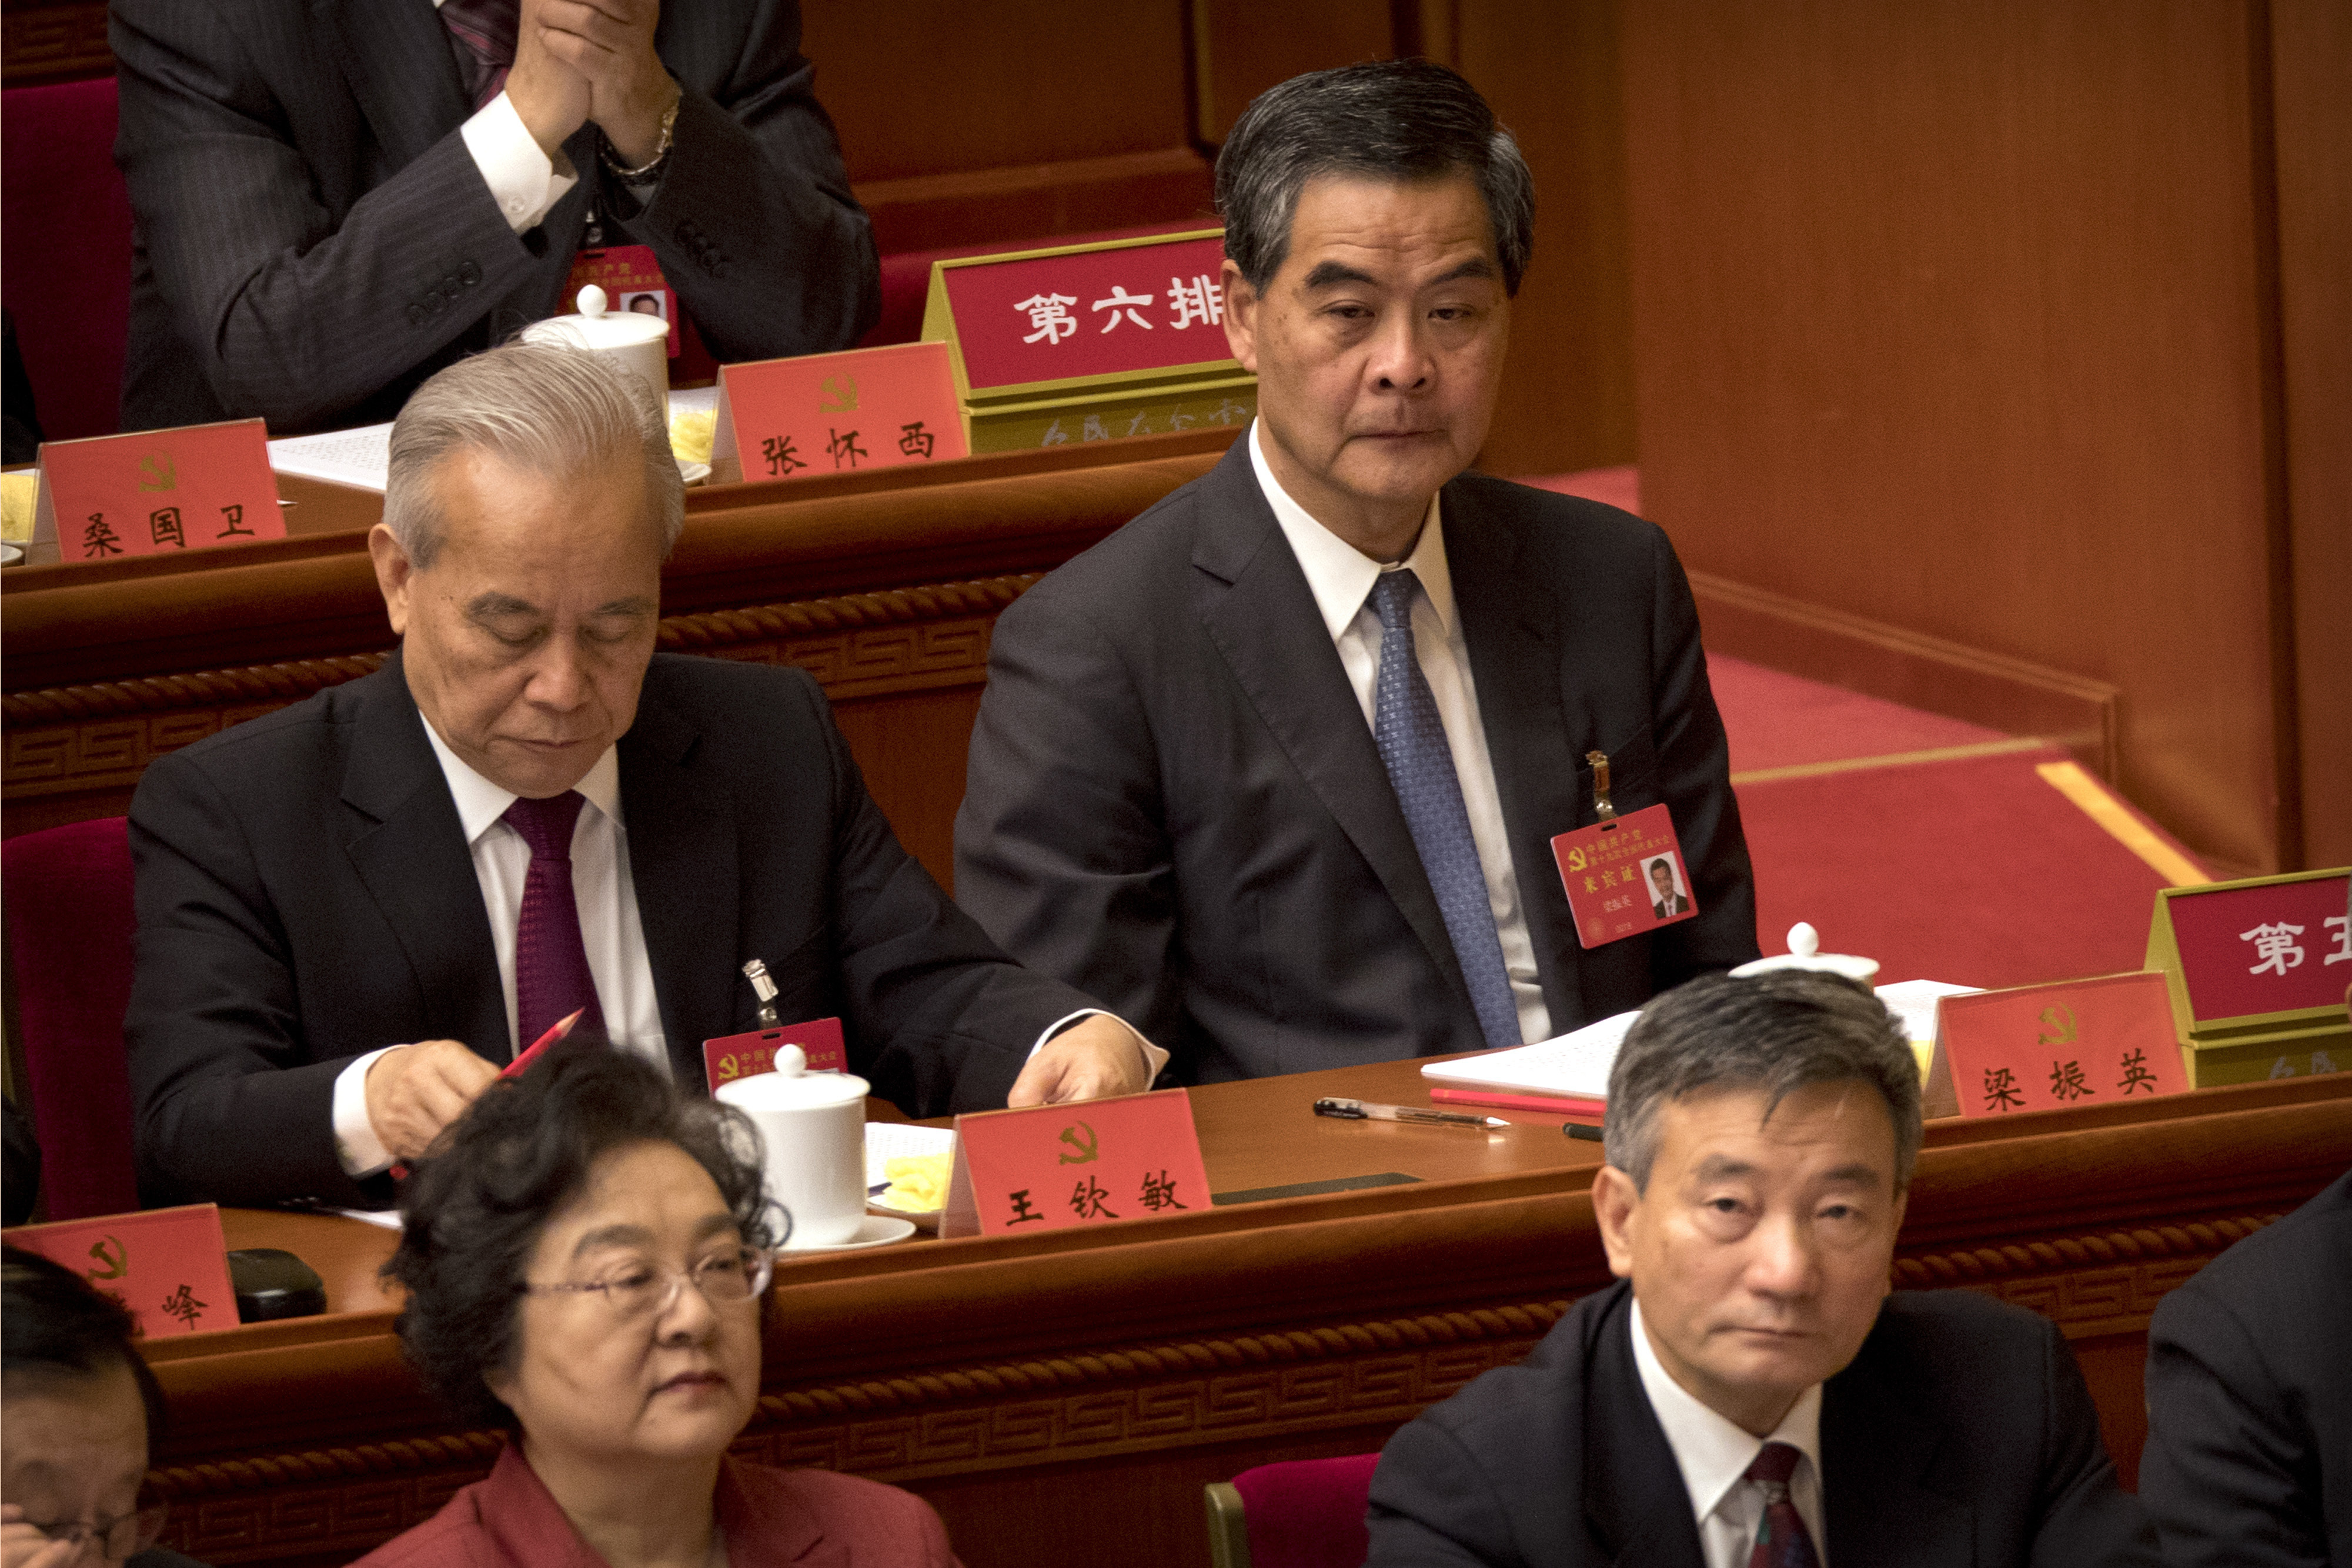 Former Hong Kong Executive Leung Chun-ying, rear right, listens to a speech by Chinese President Xi Jinping during the opening session of China's 19th Party Congress at the Great Hall of the People in Beijing, Wednesday, Oct. 18, 2017. Xi on Wednesday urged a reinvigorated Communist Party to take on a more forceful role in society and economic development to better address 